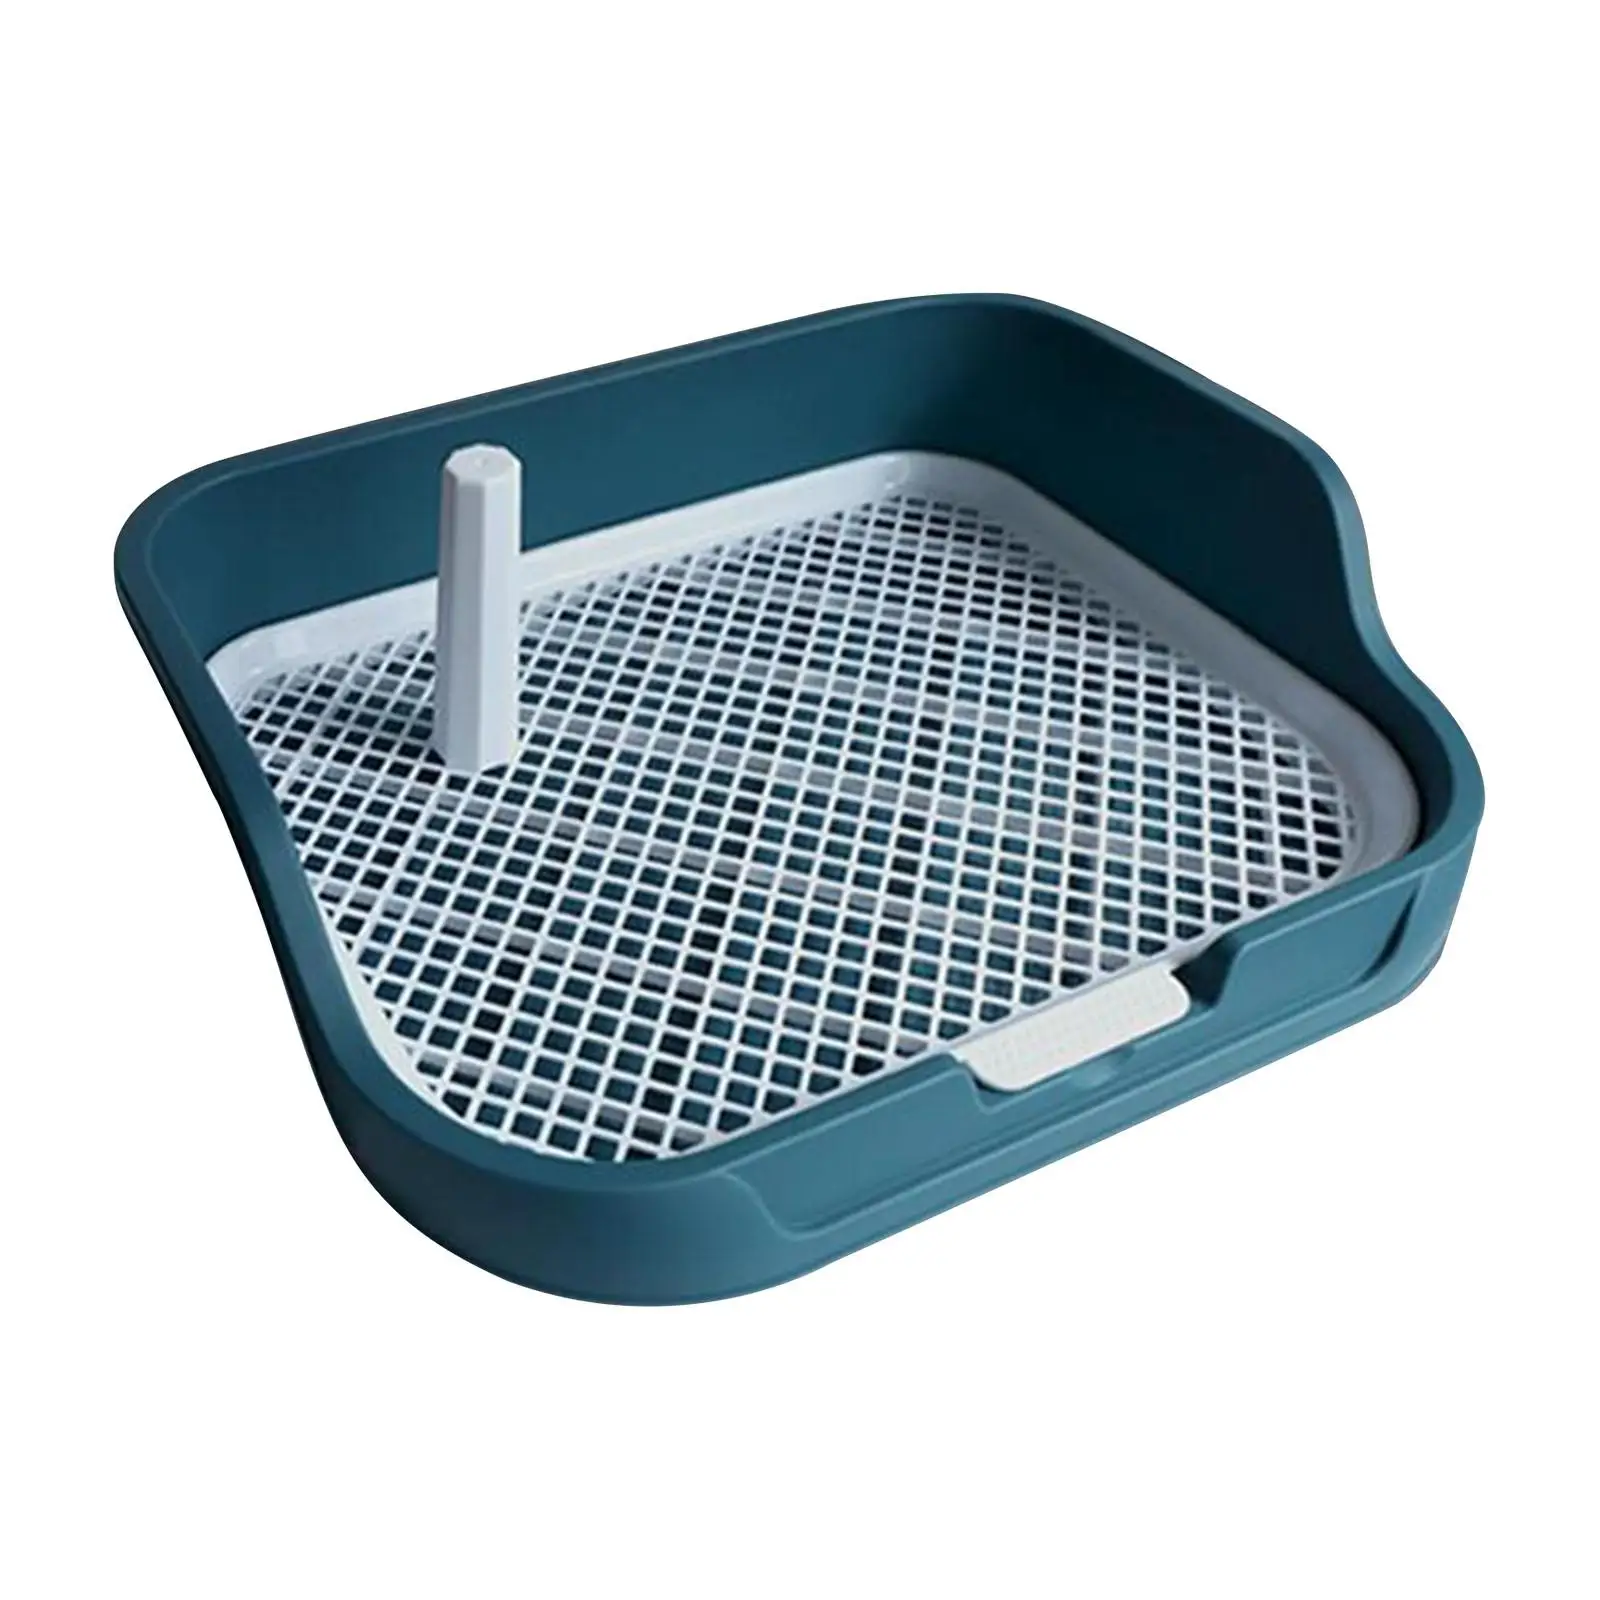 Mesh Grids Toilet Indoor Open Top Entry Dog Litter Pan Pet Training Pad Holder Dog Toilet for Cats Puppy Indoor Bunny Porch